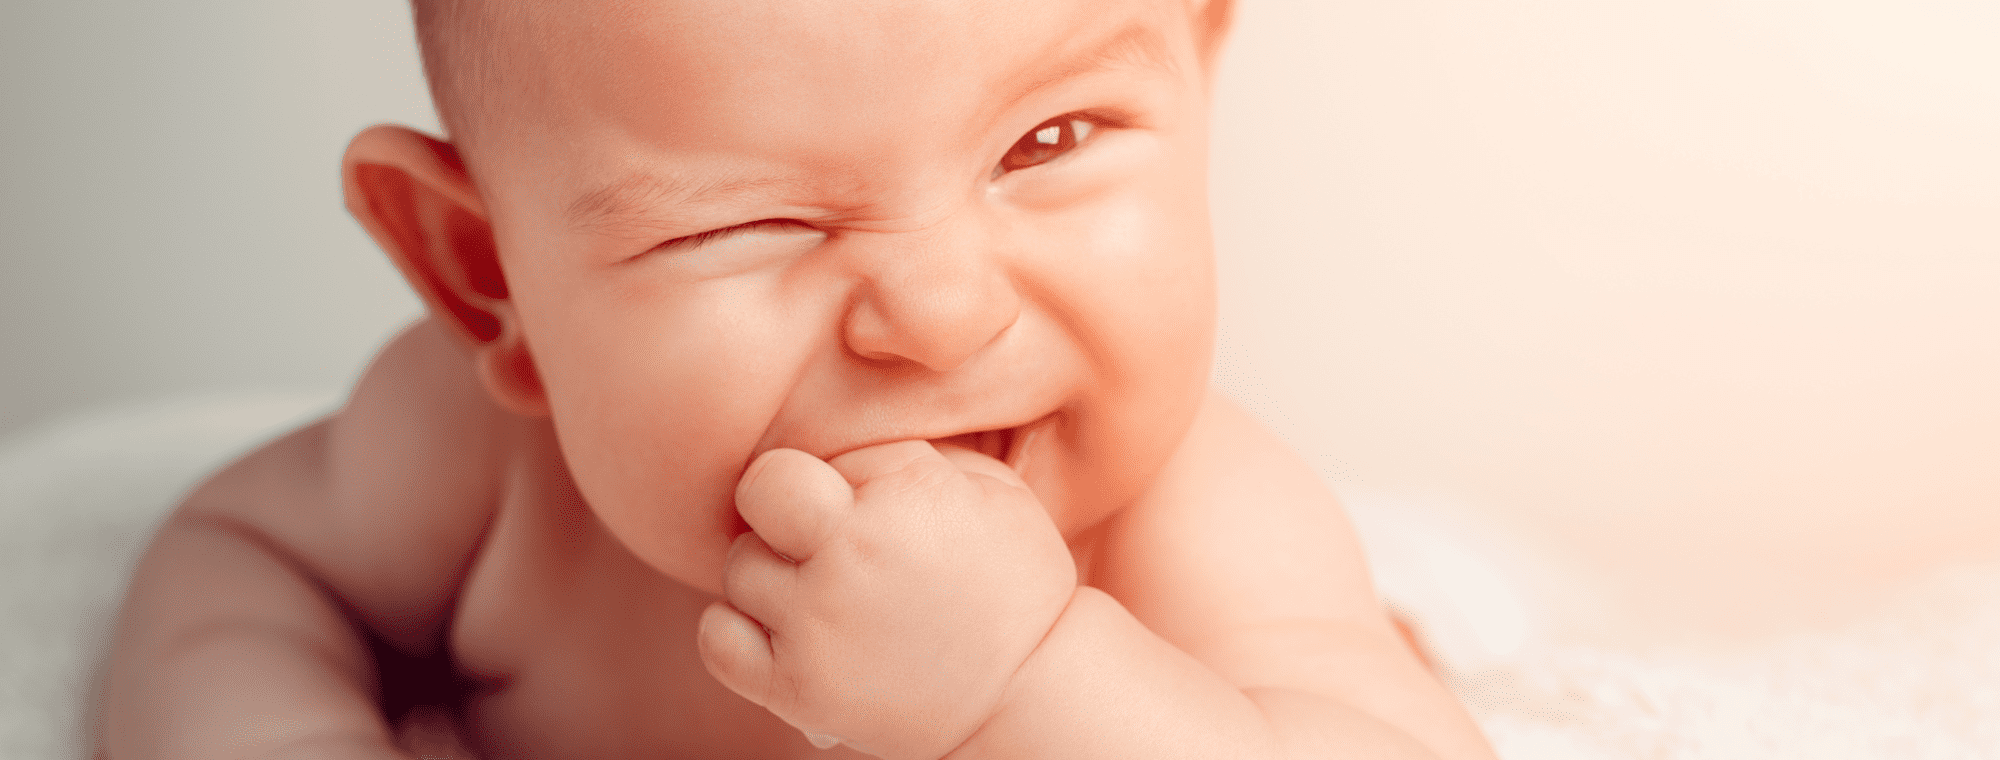 Top Tips for Soothing a Teething Baby